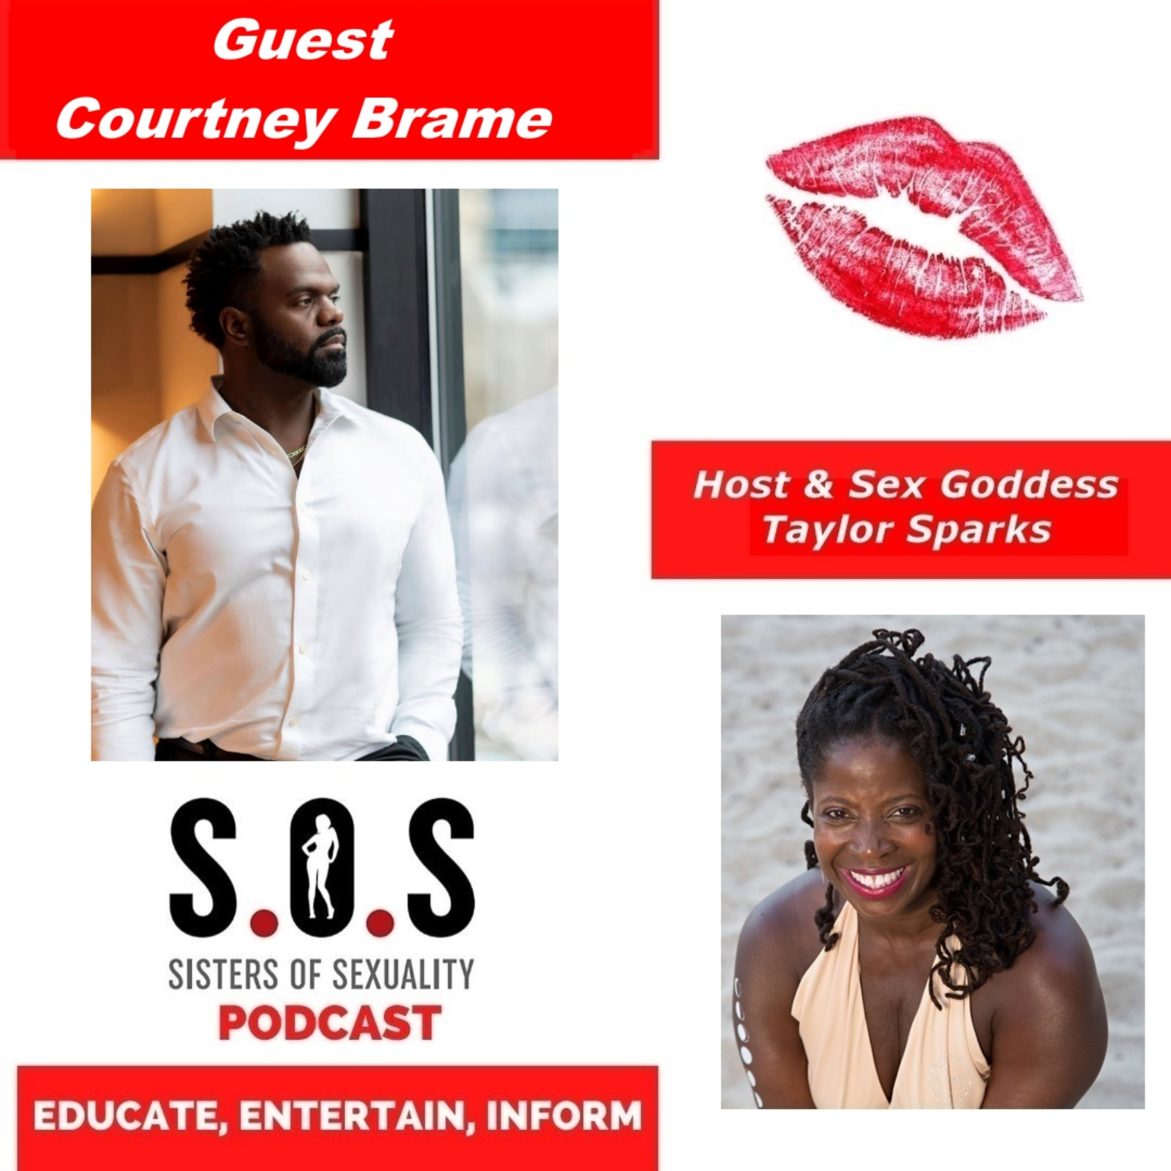 Black Podcasting - A Heart To Heart Conversation With Courtney Brame of Something Positive For Positive People